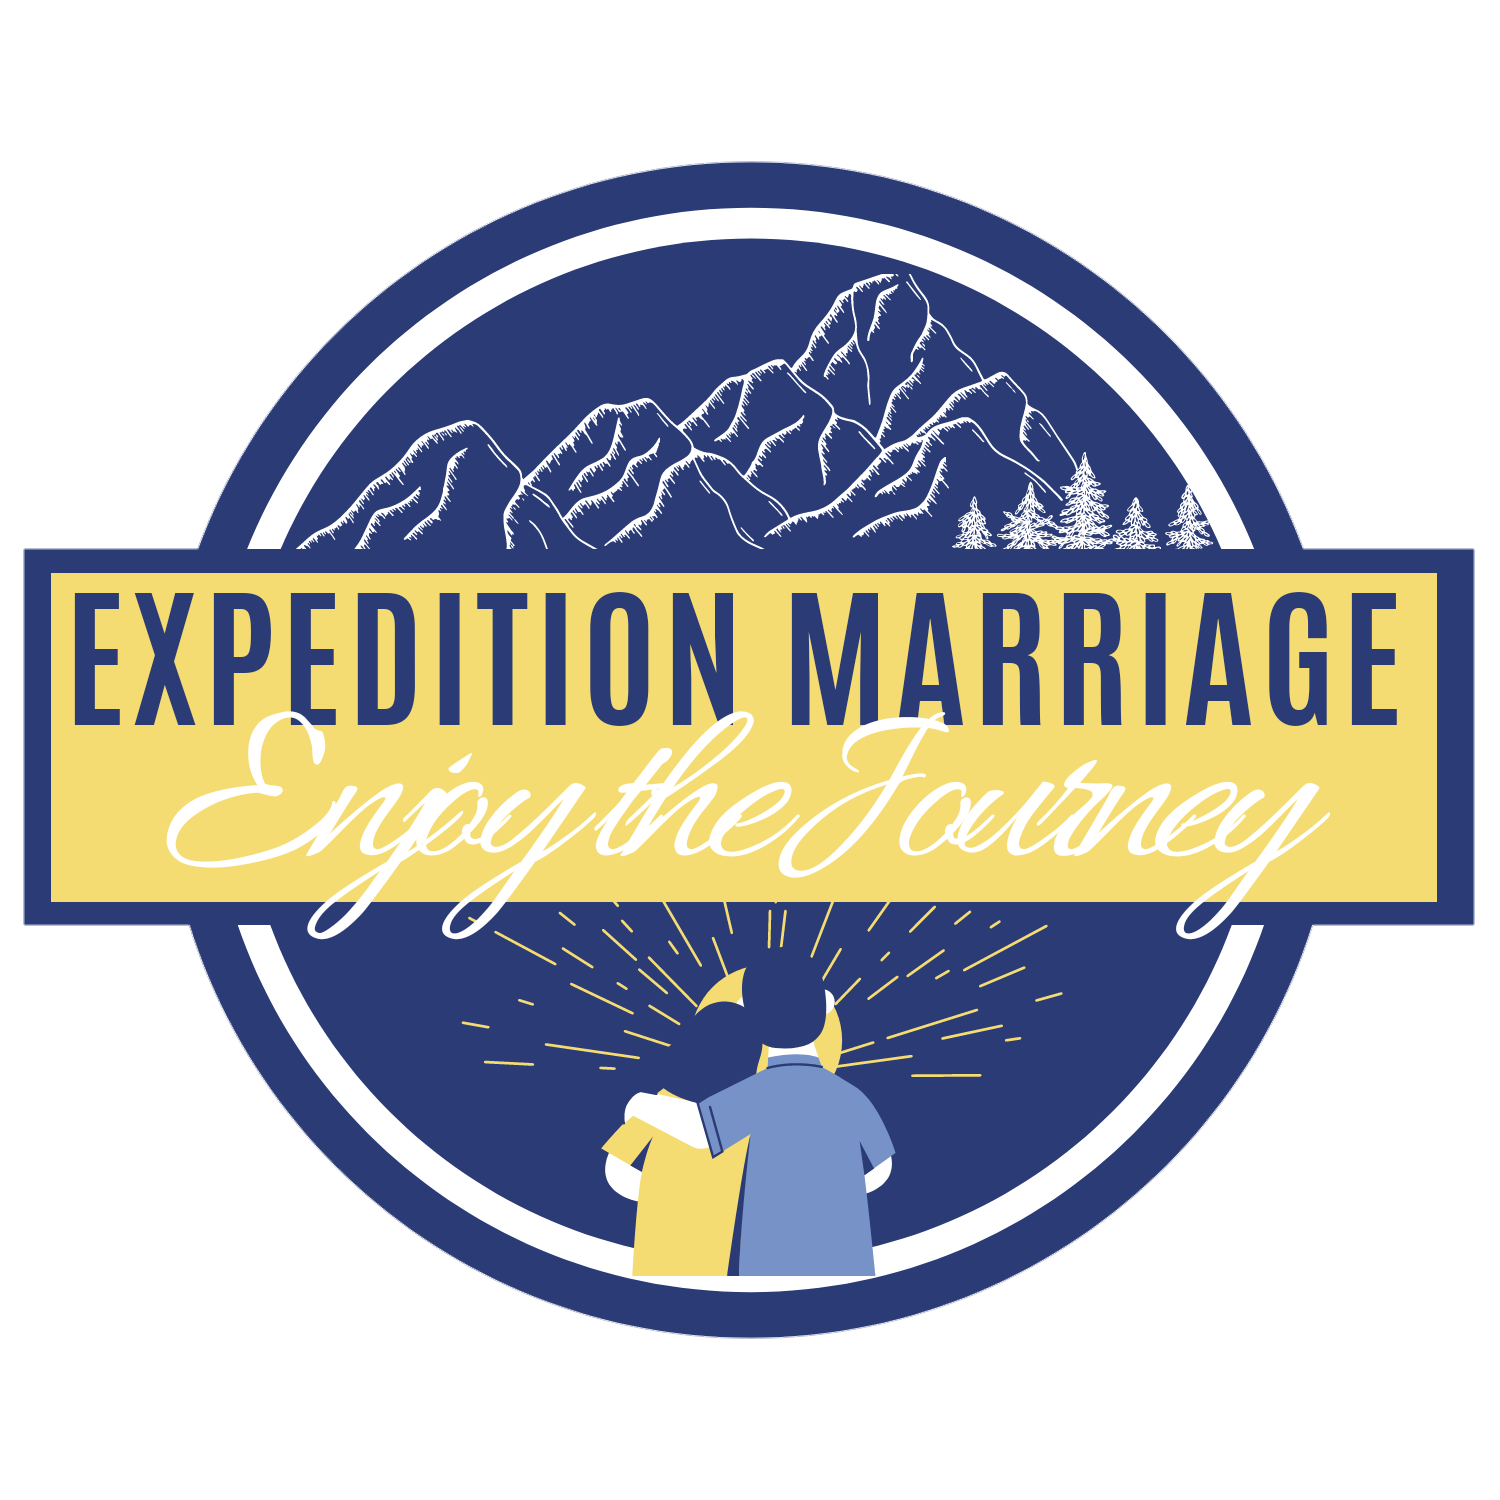 Expedition Marriage